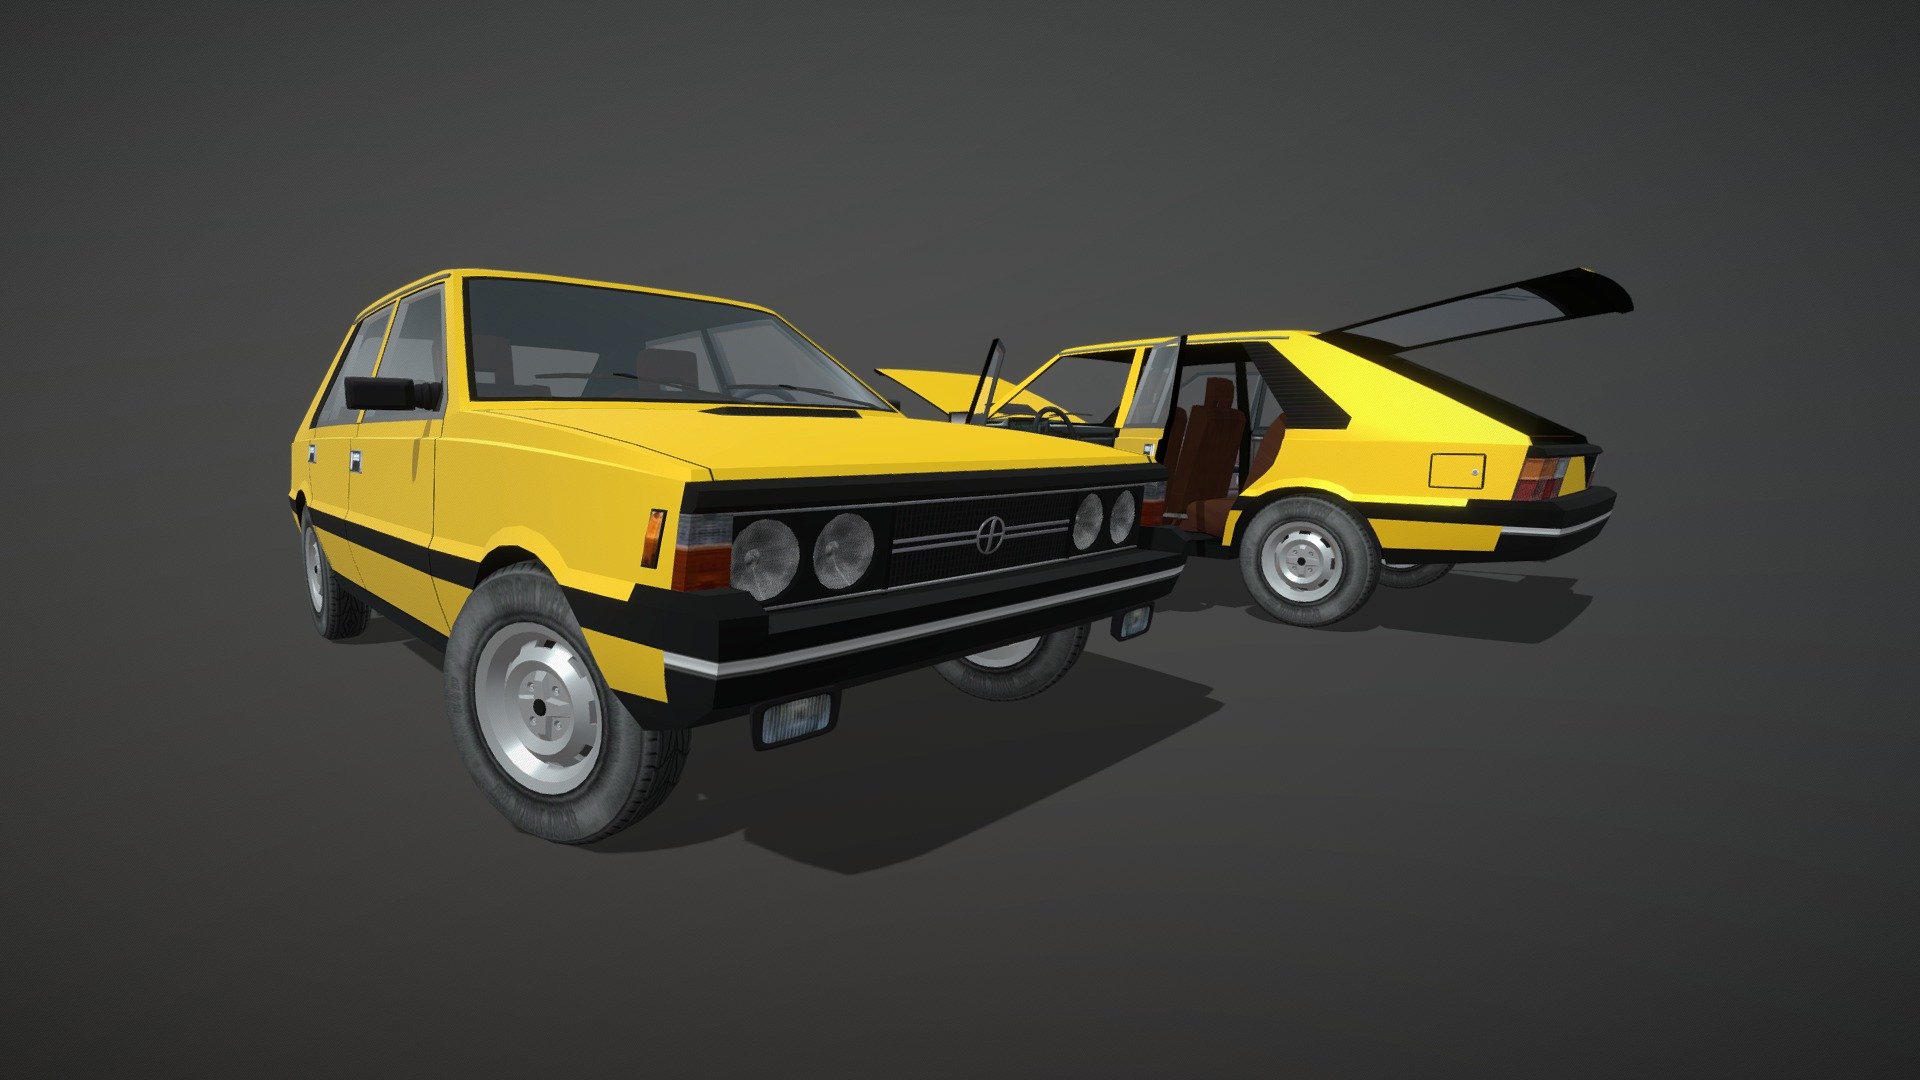 The FSO Polonez 1500 i made from scratch using blueprints and images for NFS ProStreet Pepega Edition.

It was the first car i made for the mod and i had so much fun creating it.

Of course its not perfect, the model had some major changes over time including a whole overhaul of it because some proportions were off in many spots and of course there was some scrapped content.

I tried my best in doing it as accurate as possible and im very happy with the final result.

And of course you car drive it and upgrade it in the mod!

I really recomment playing the mod because my friends put a lot of effort into it and they deserve it.

You can get the mod here:

https://pepegamod.com/pepega-download/

Special Thanks for:

-Pepega Team for giving me a chance and of course for being the best dudes i ever met,

-Marf, Ekskalibur12, and my other great friends for their support,

-And of course You for playing the mod and enjoying the work me and my friends did 3d model